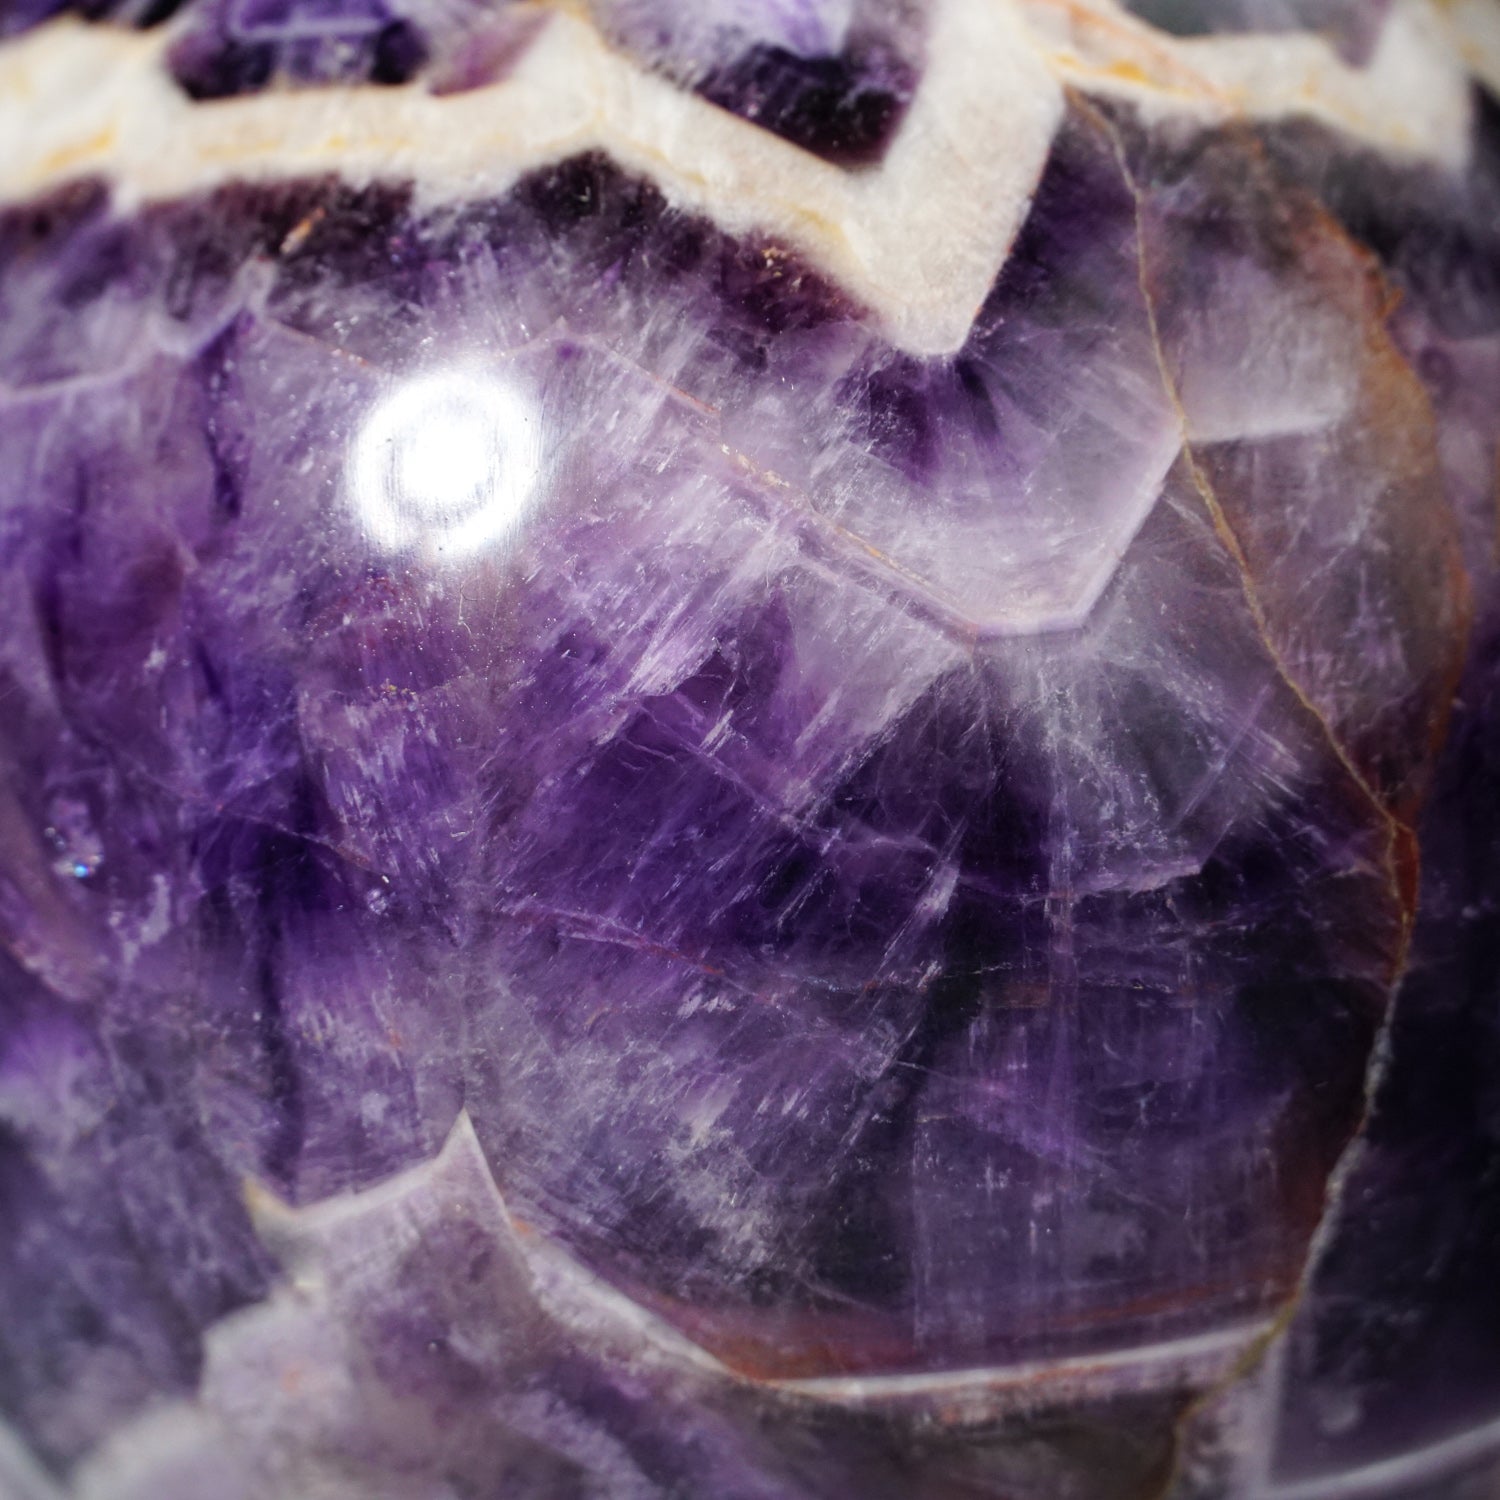 Polished Chevron Amethyst Sphere from Brazil (3.5", 2.2 lbs)